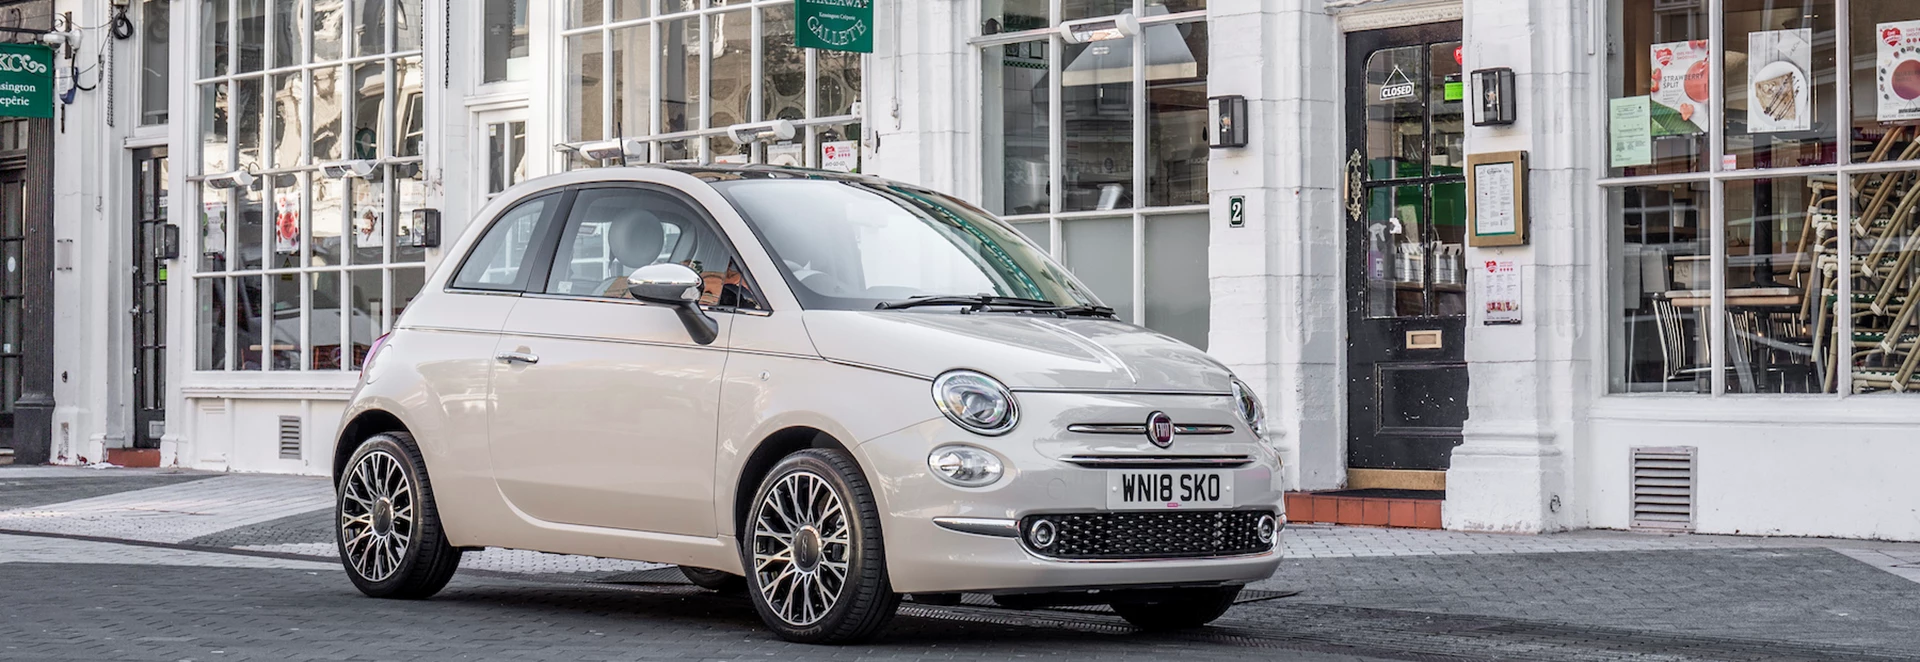 2020 Fiat 500 EV: All you need to know